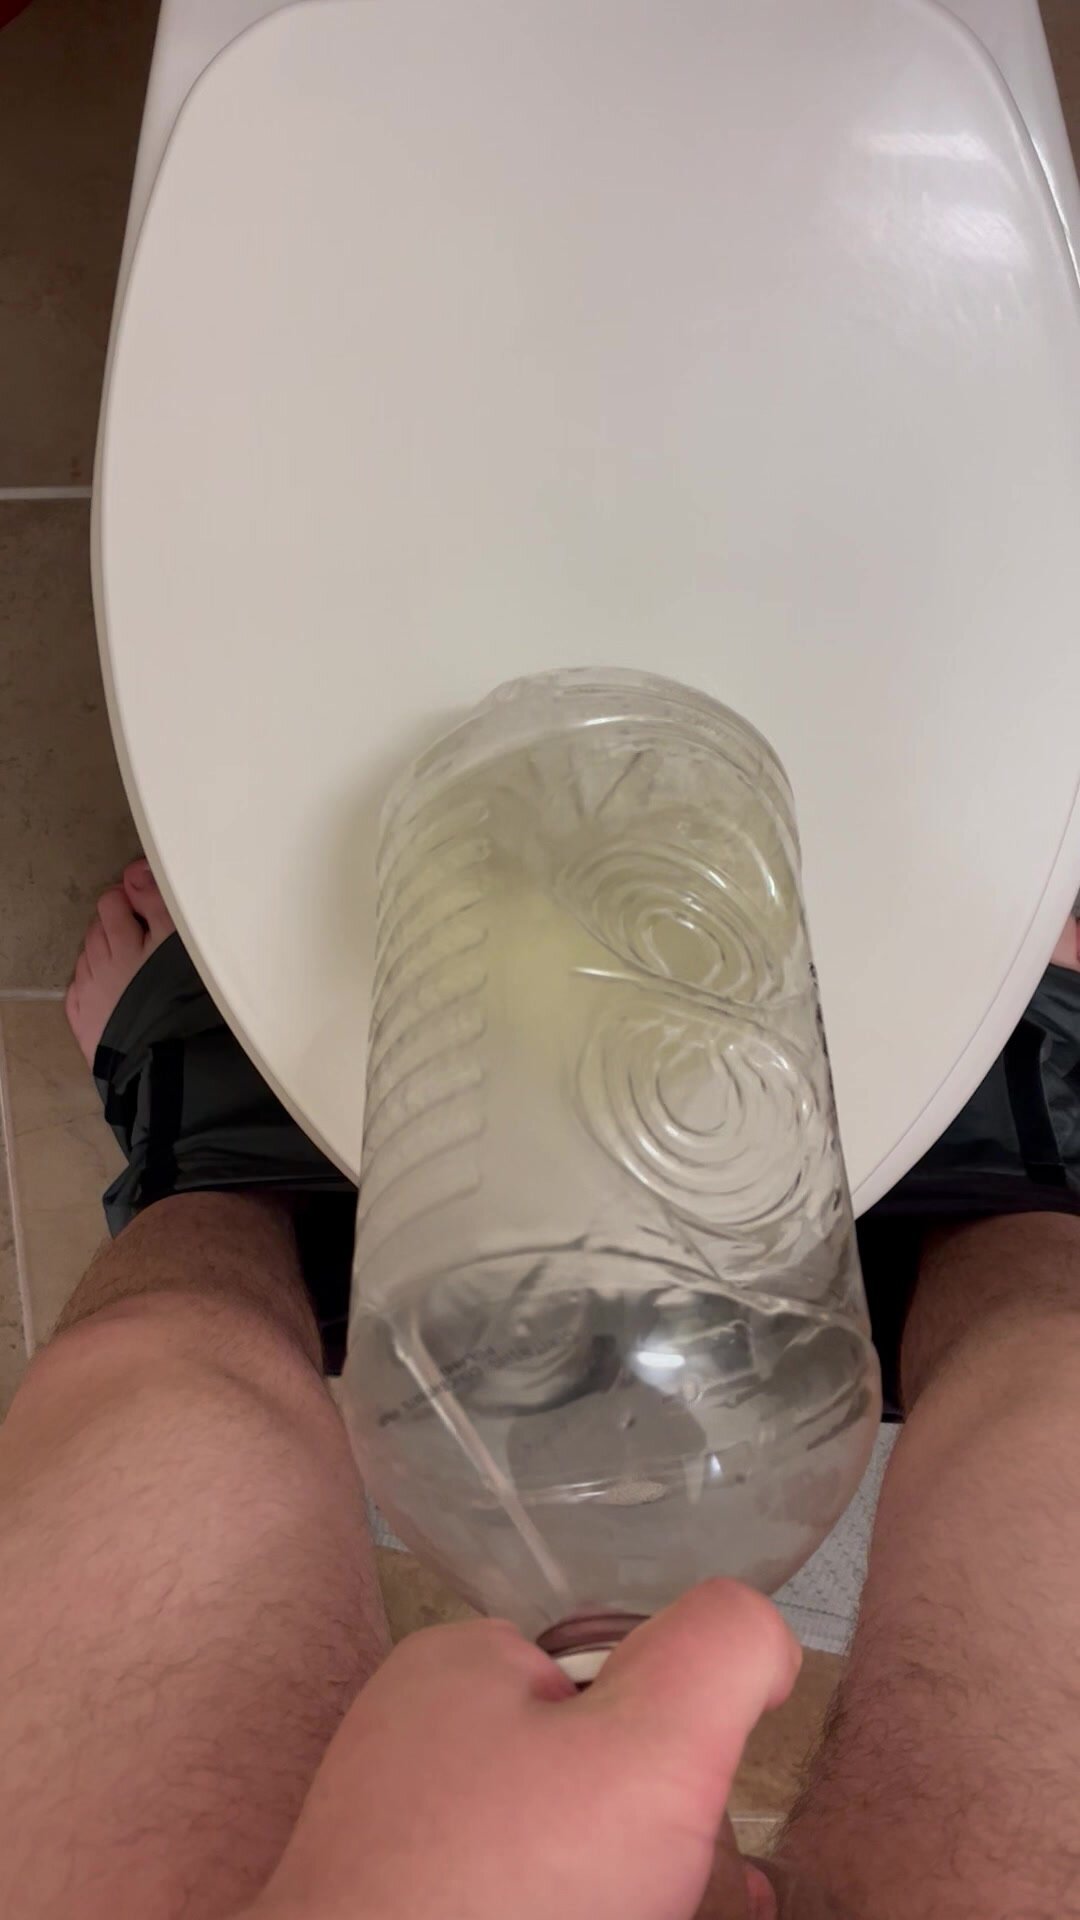 Strong Piss: Nearly 750 ml of piss in under 15 seconds